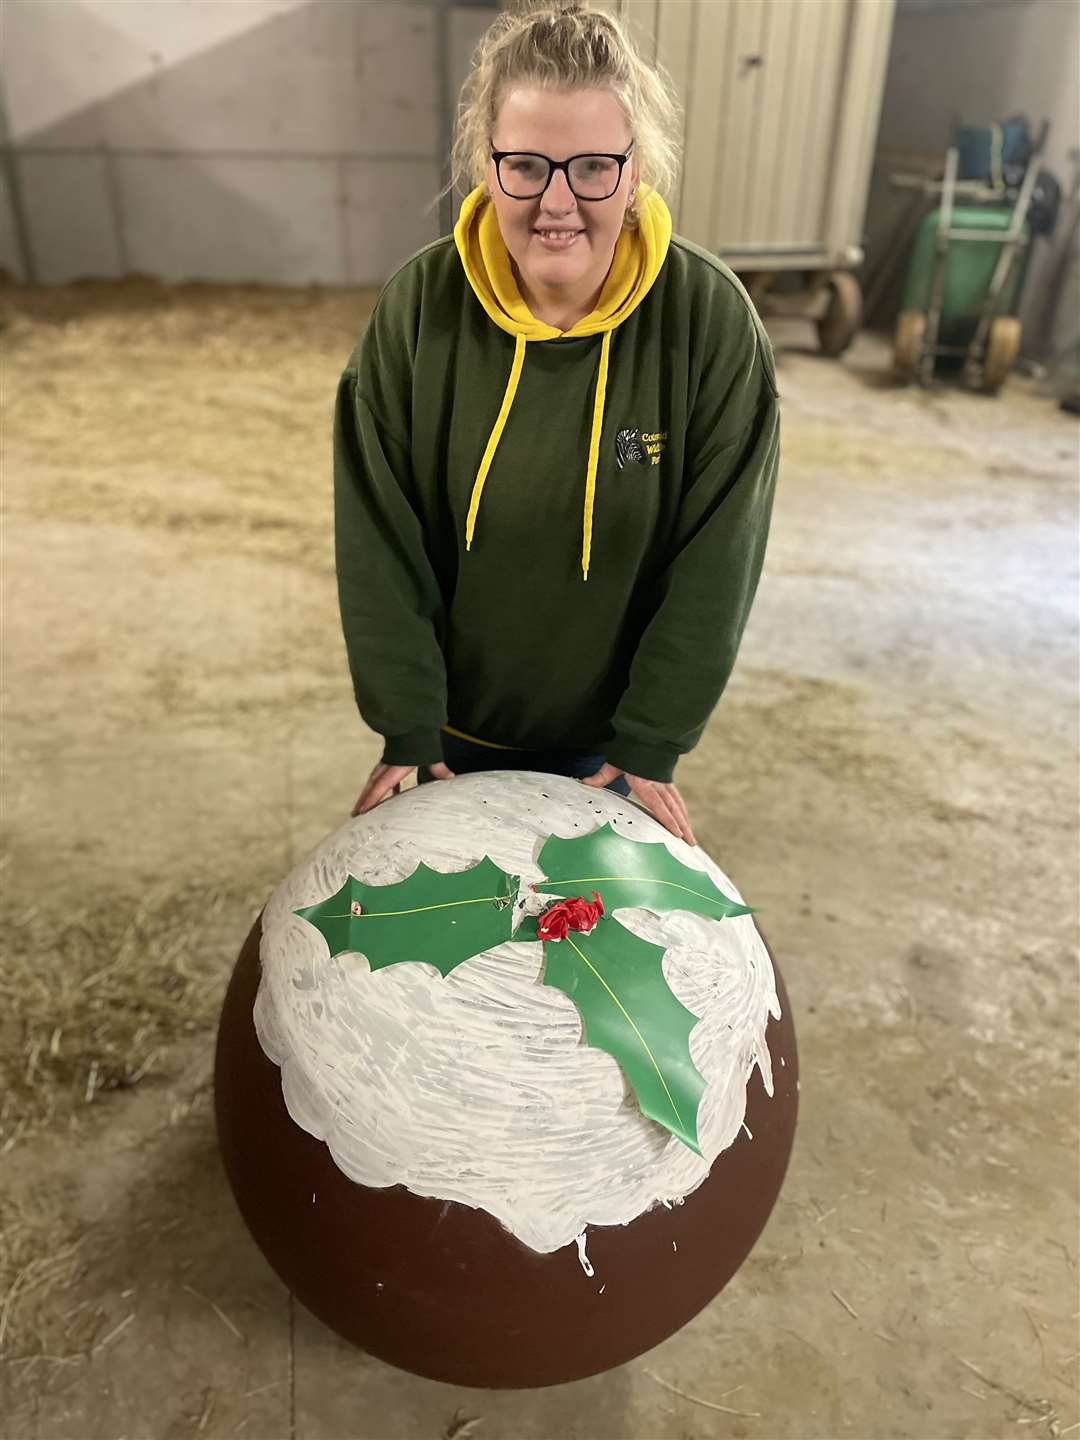 The keepers at Cotswold Wildlife Park prepared a catnip-covered Christmas pudding enrichment ball for their Asiatic lions – they were not fans (Cotswold Wildlife Park)